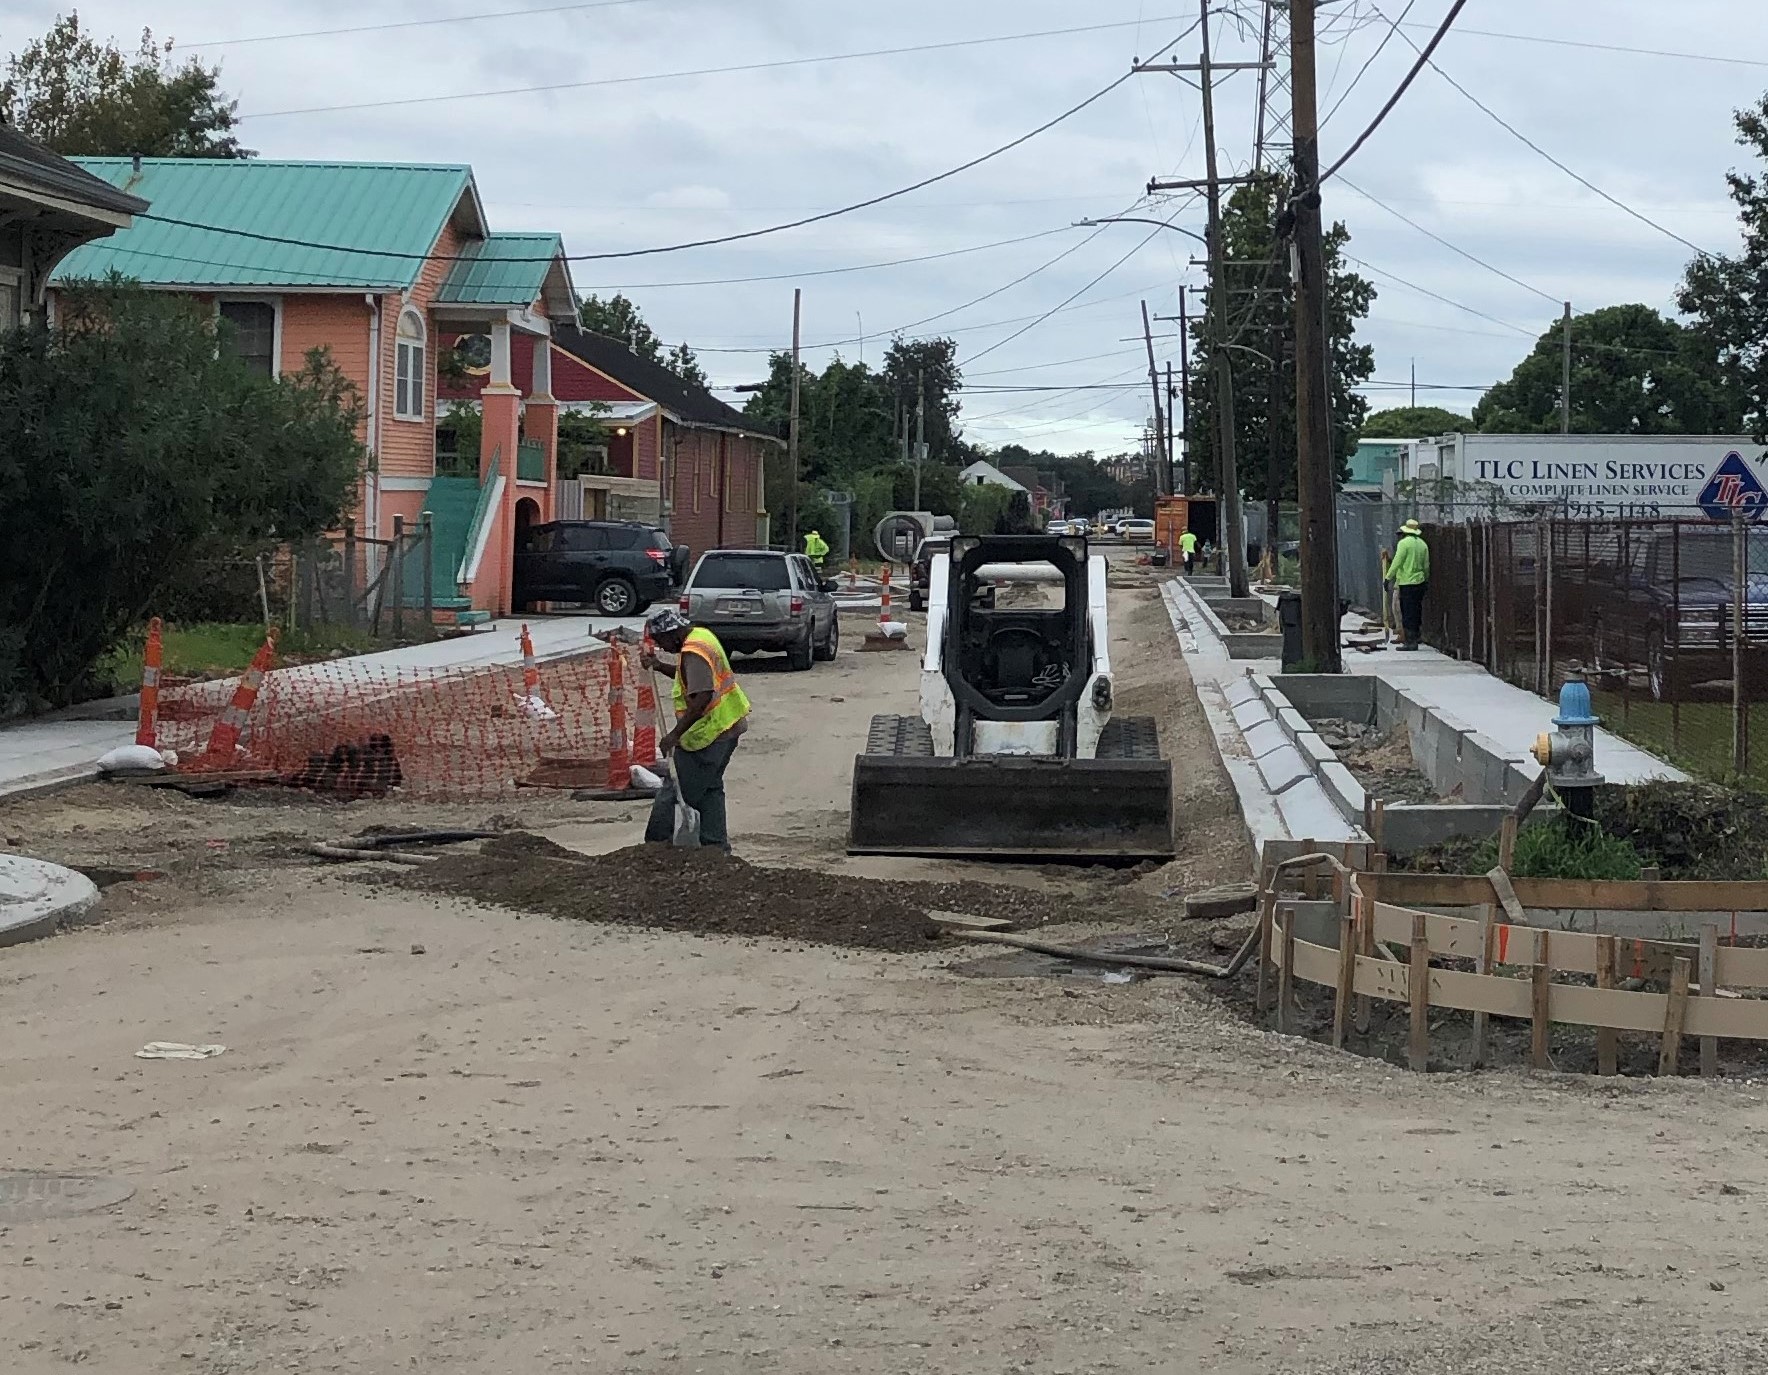 ST. CLAUDE DRAINAGE PROJECT CREWS ARE POURING CONCRETE AND WRAPPING UP WATER LINES